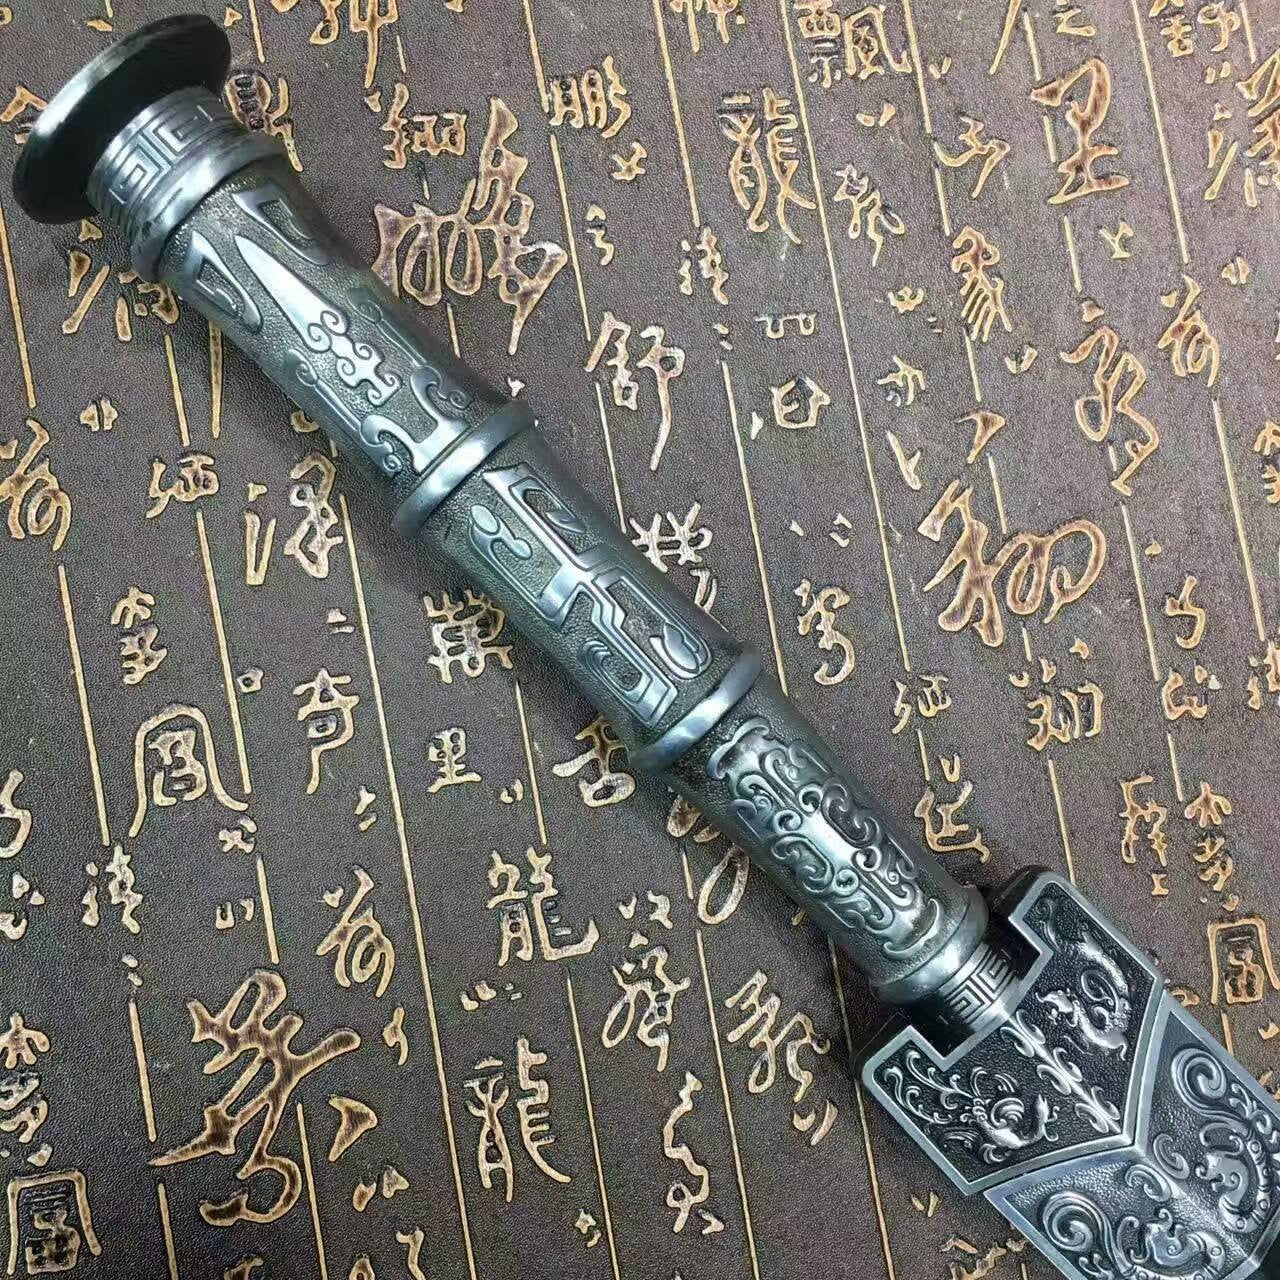 Han jian/High carbon steel eight surface blade/Black wood/Alloy handle - Chinese sword shop